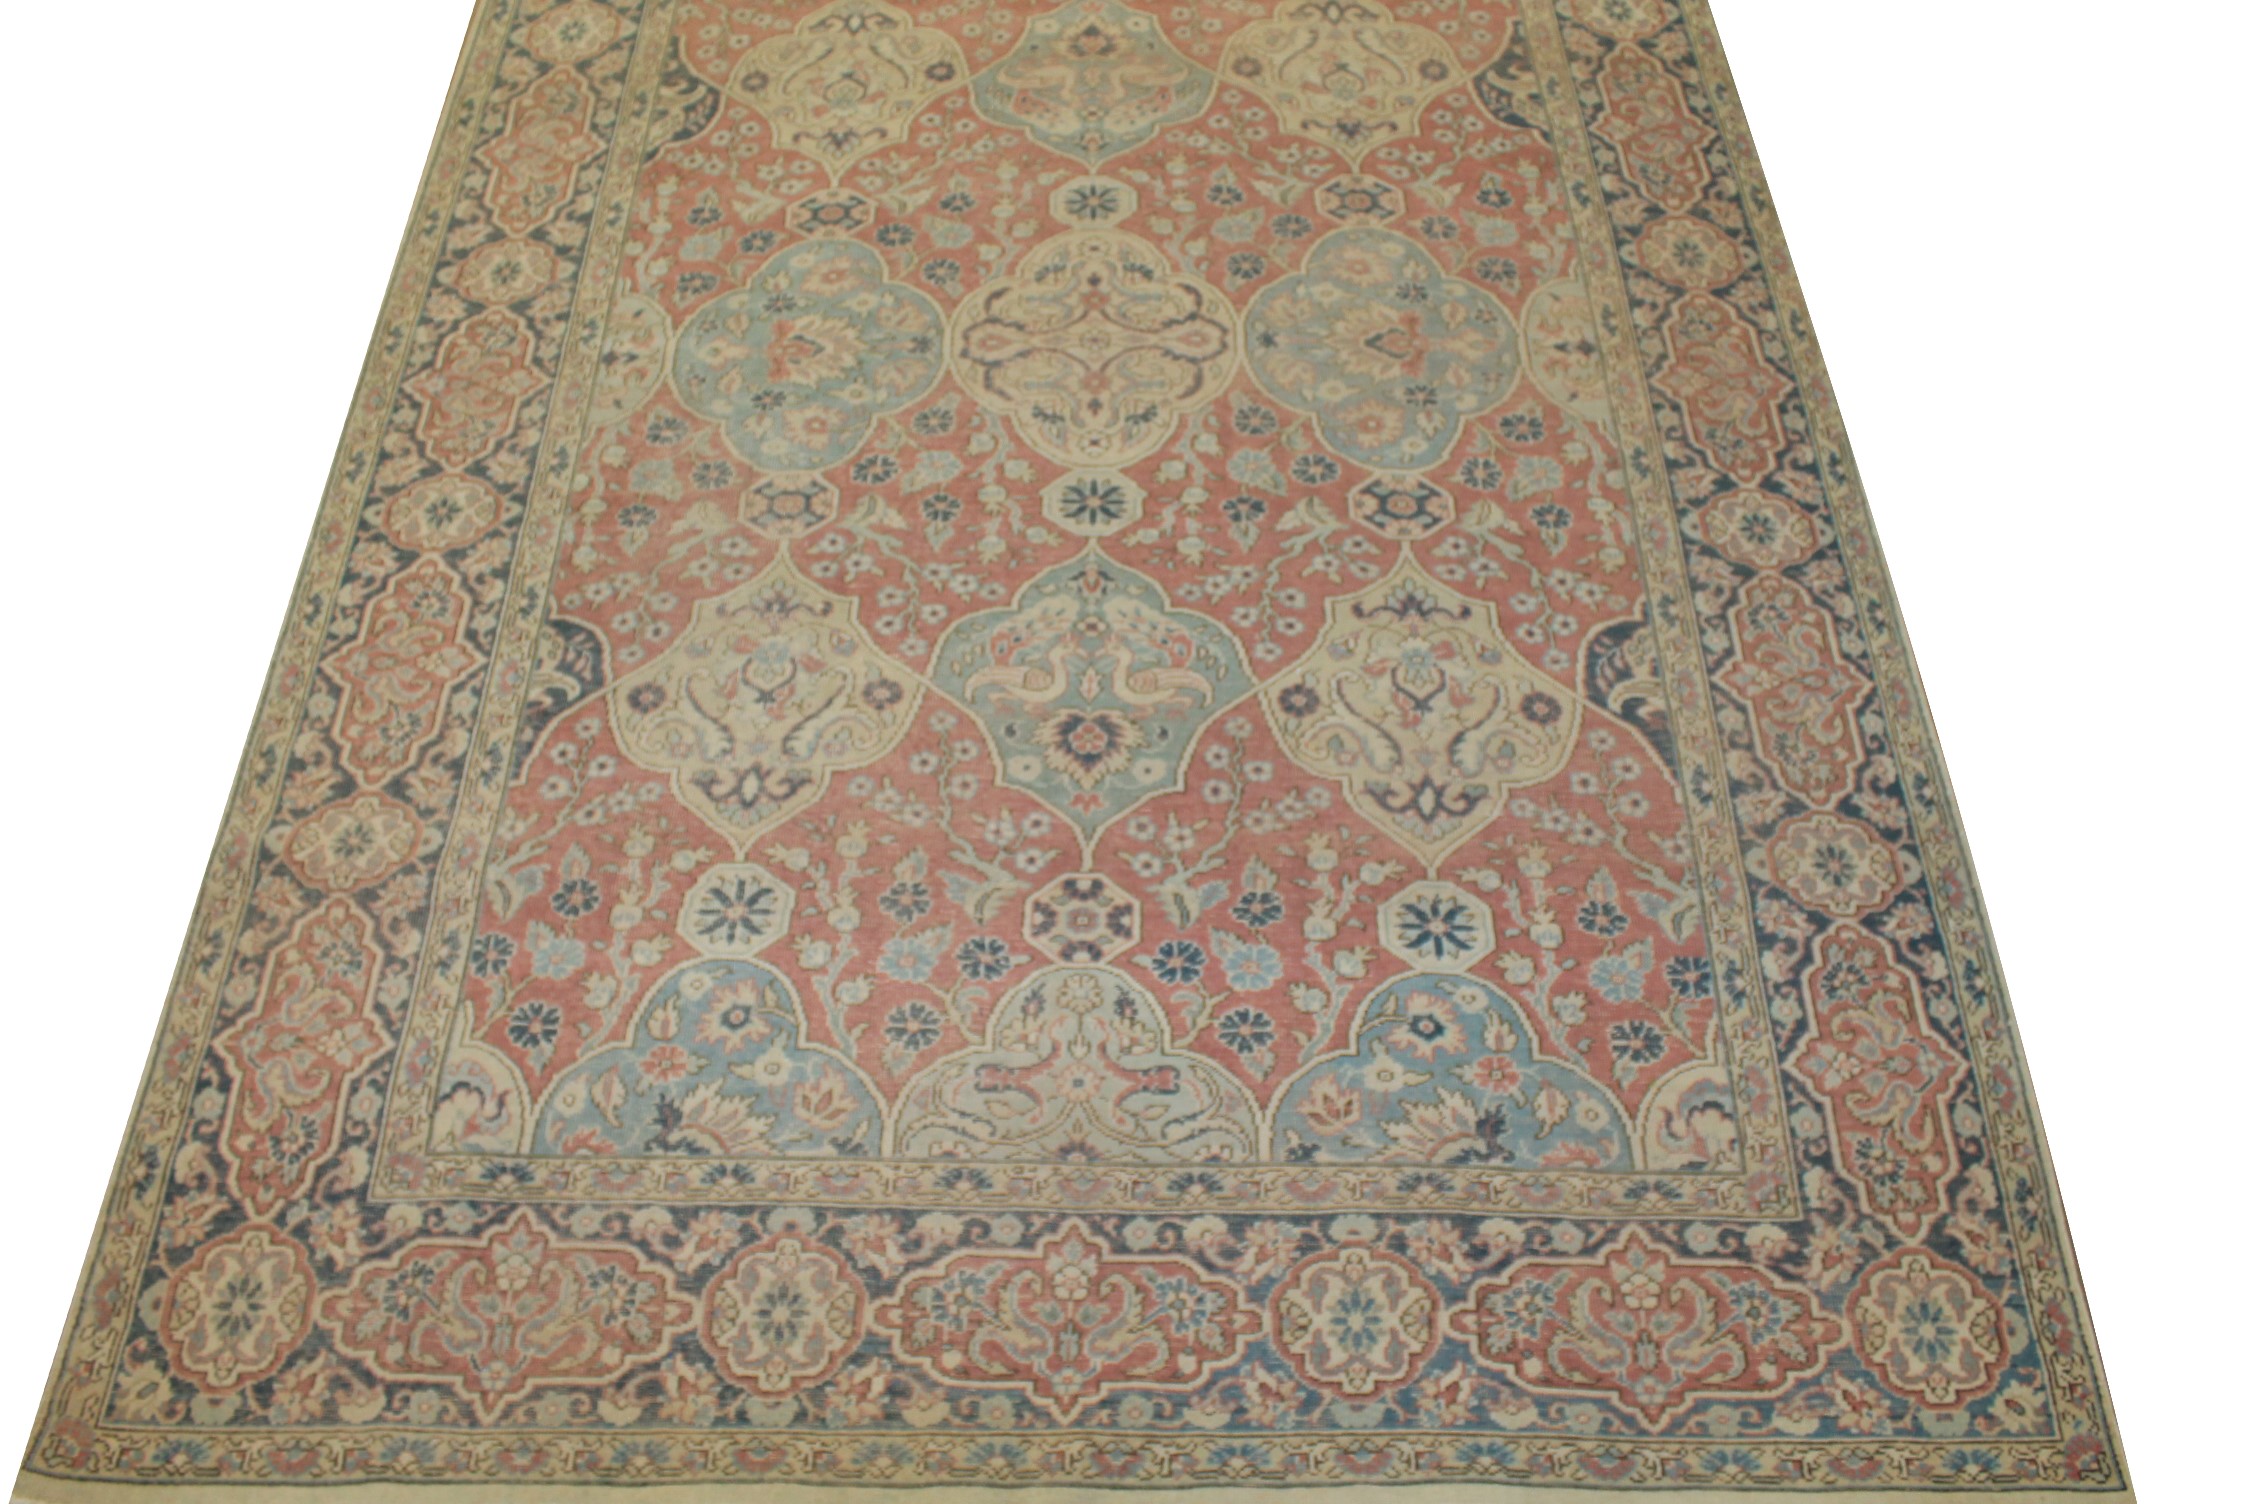 9x12 Vintage Hand Knotted Wool Area Rug - MR025326